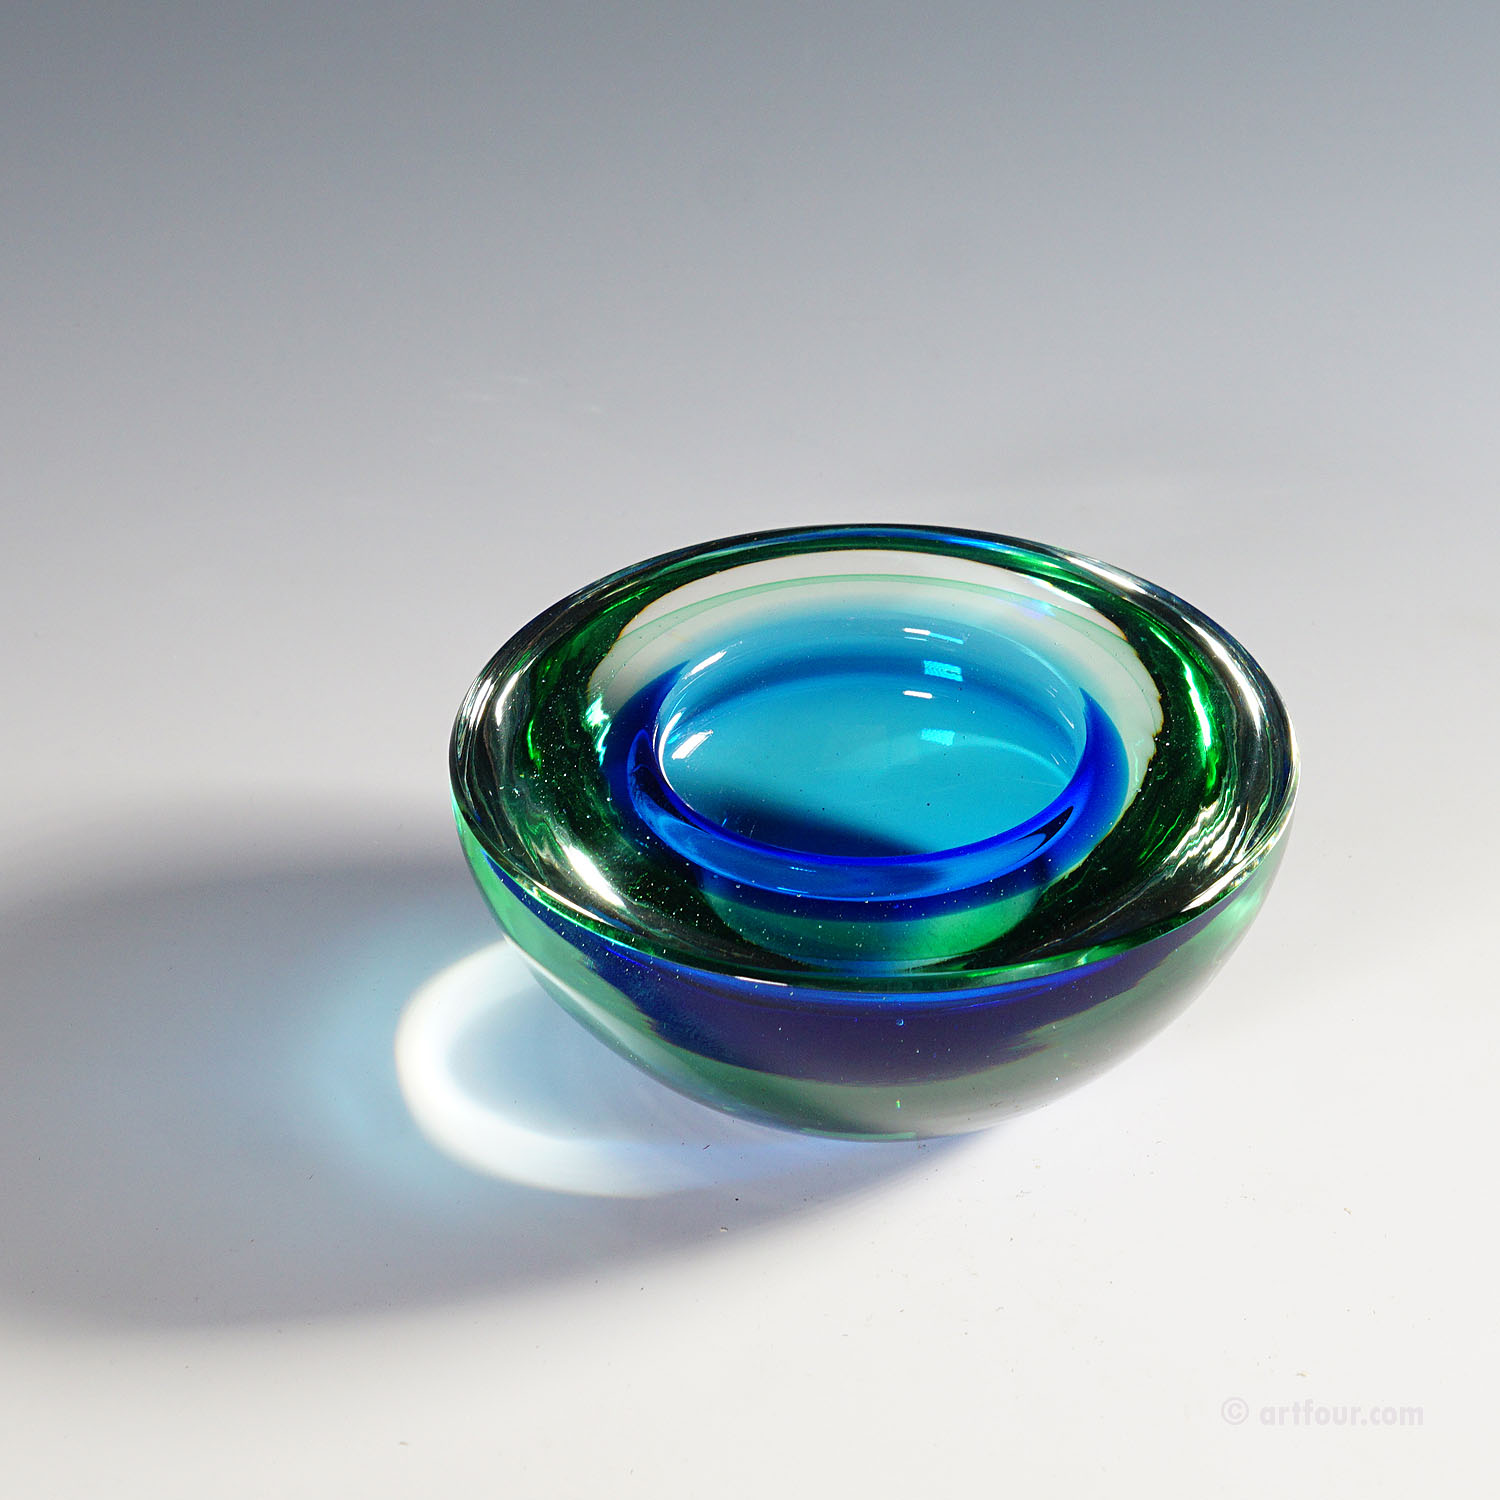 Archimede Seguso Geode Bowl in Green and Blue, Murano Italy ca. 1950s